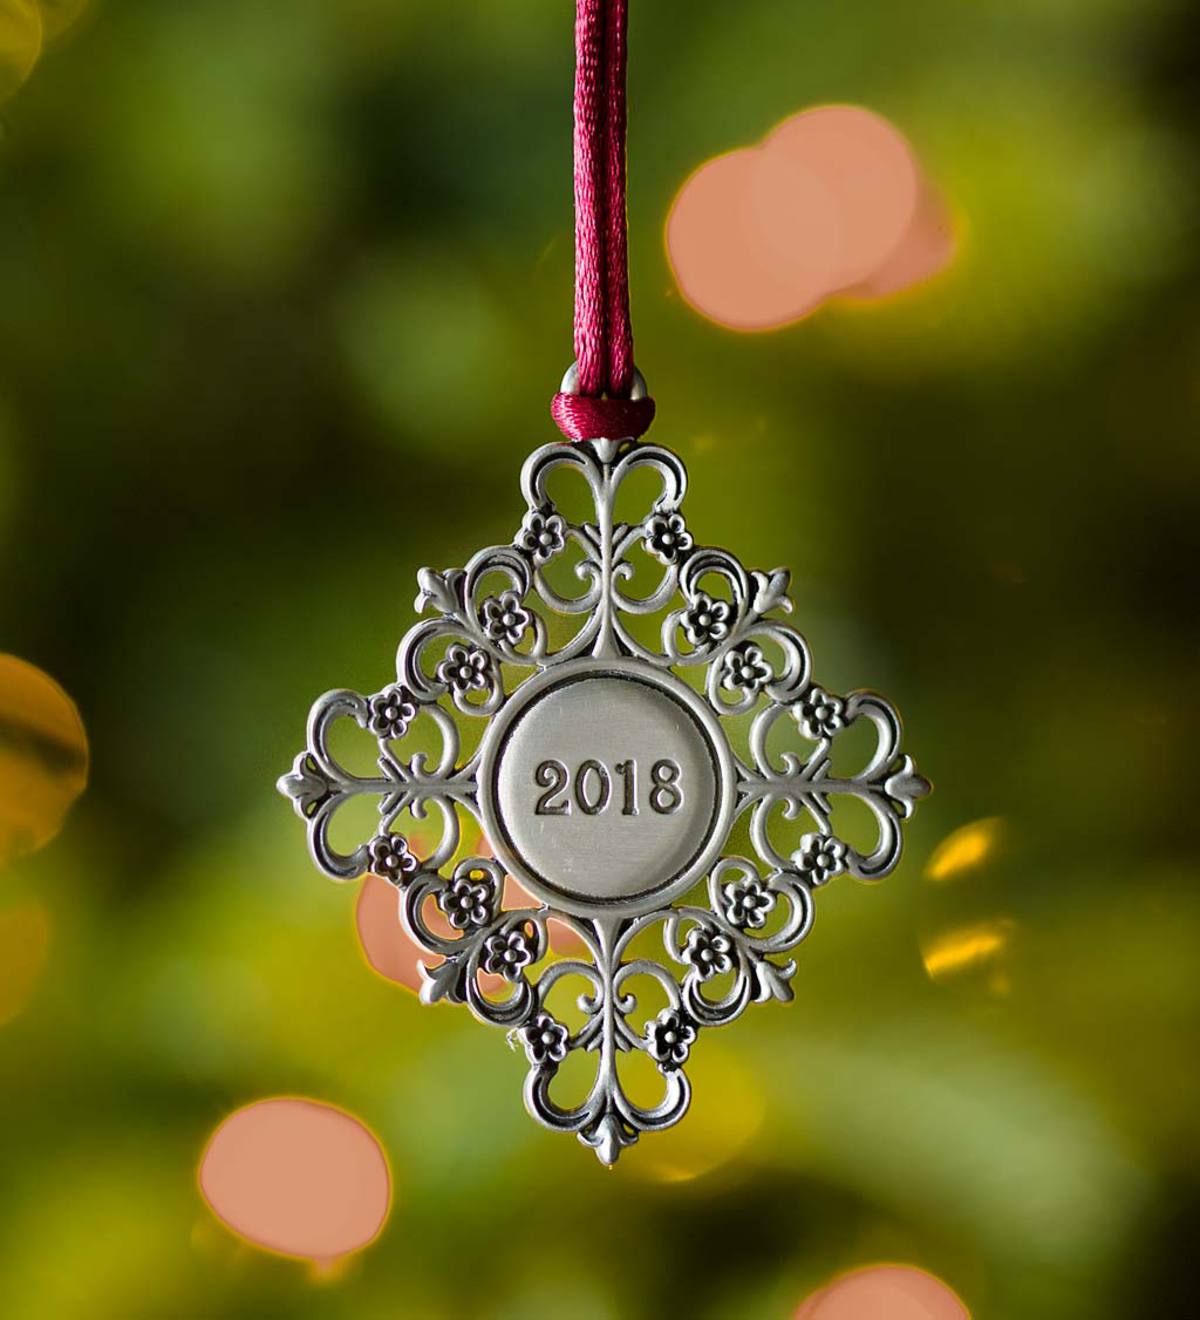 Solid Pewter Christmas Tree Ornament - 2018